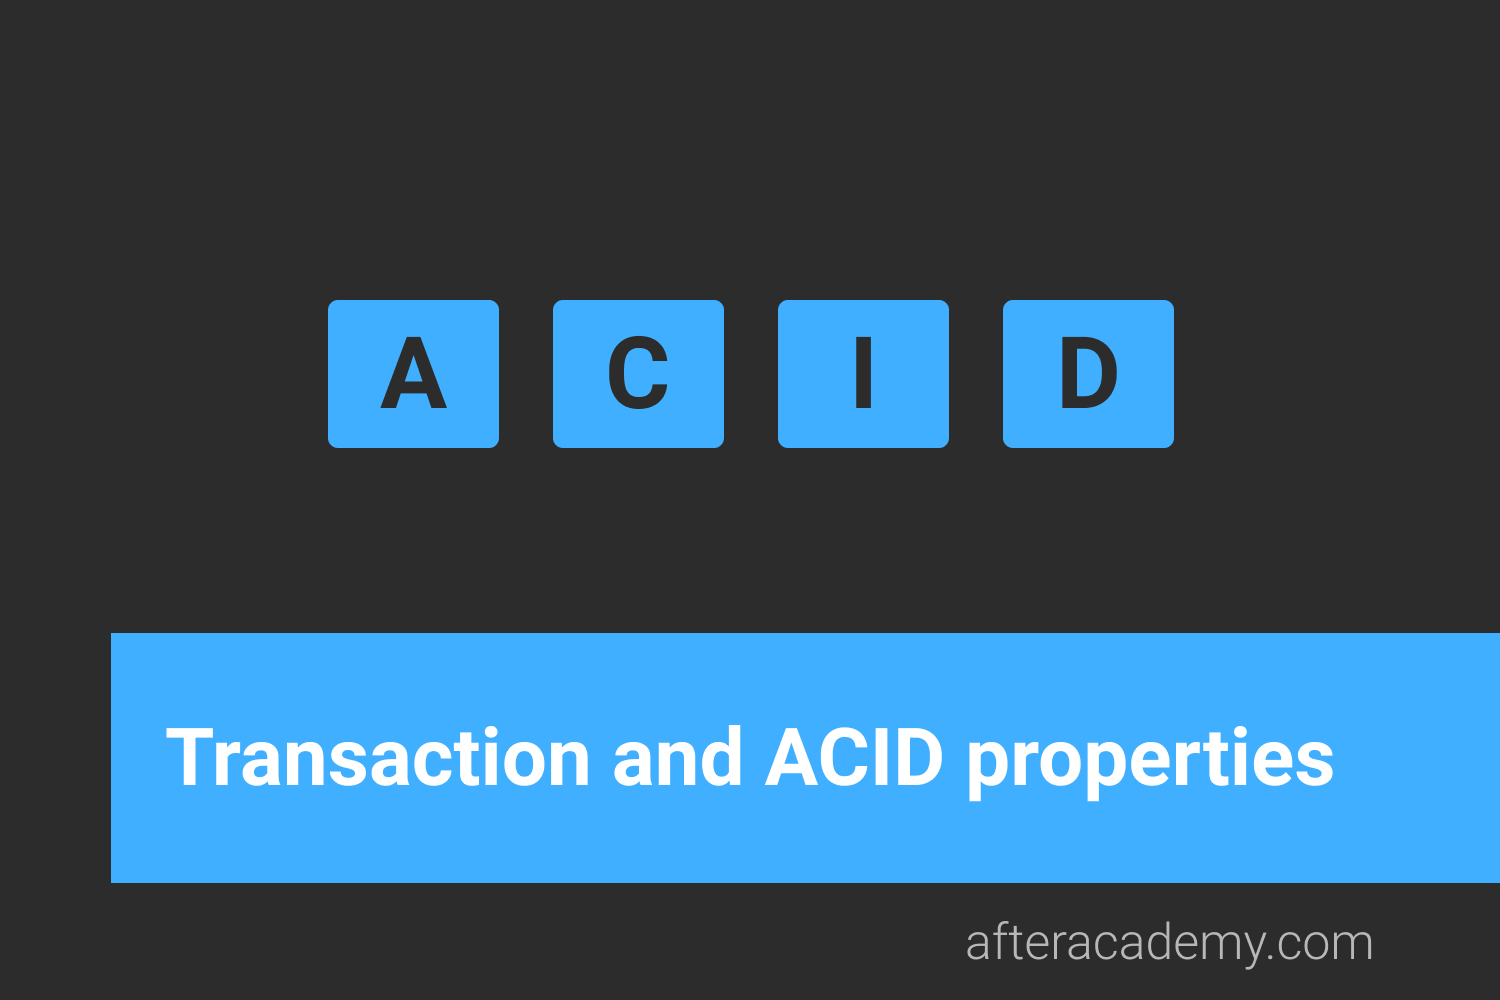 What is a transaction? What are ACID properties?